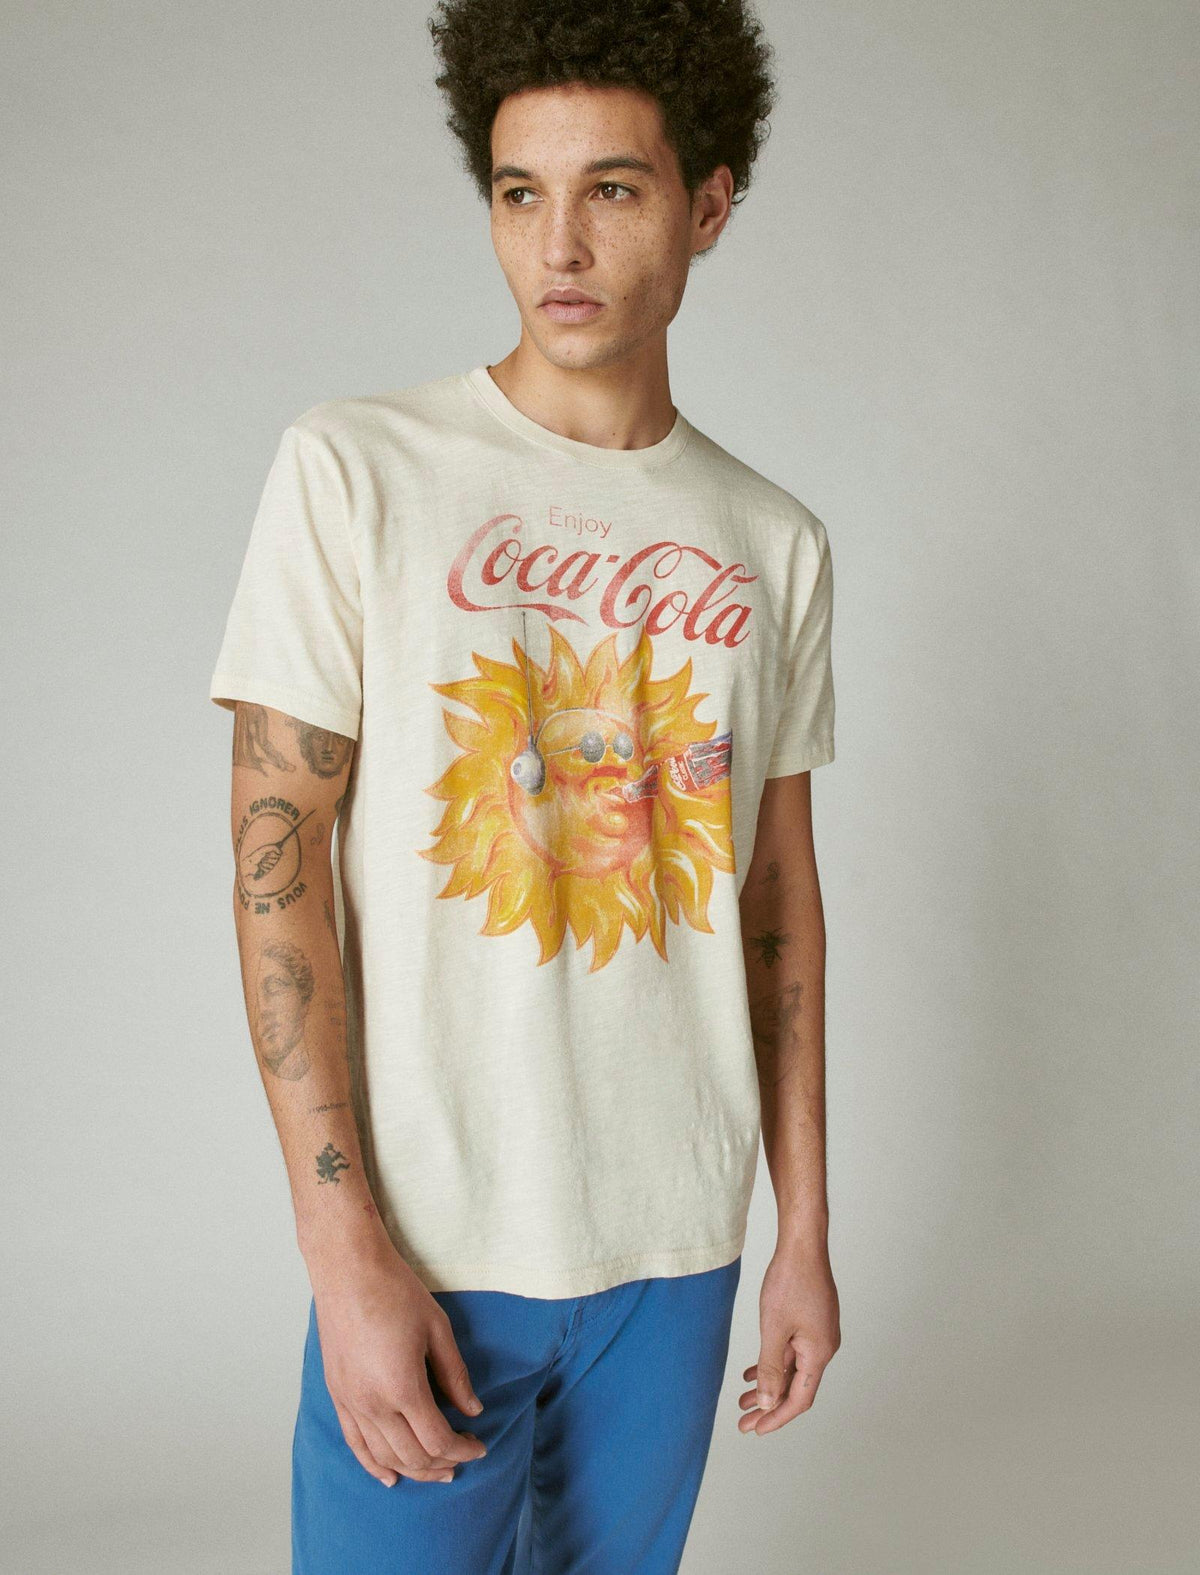 Lucky Brand Coca Cola Sunshine Graphic Tee - Men's Clothing Tops Shirts Tee Graphic T Shirts Birch